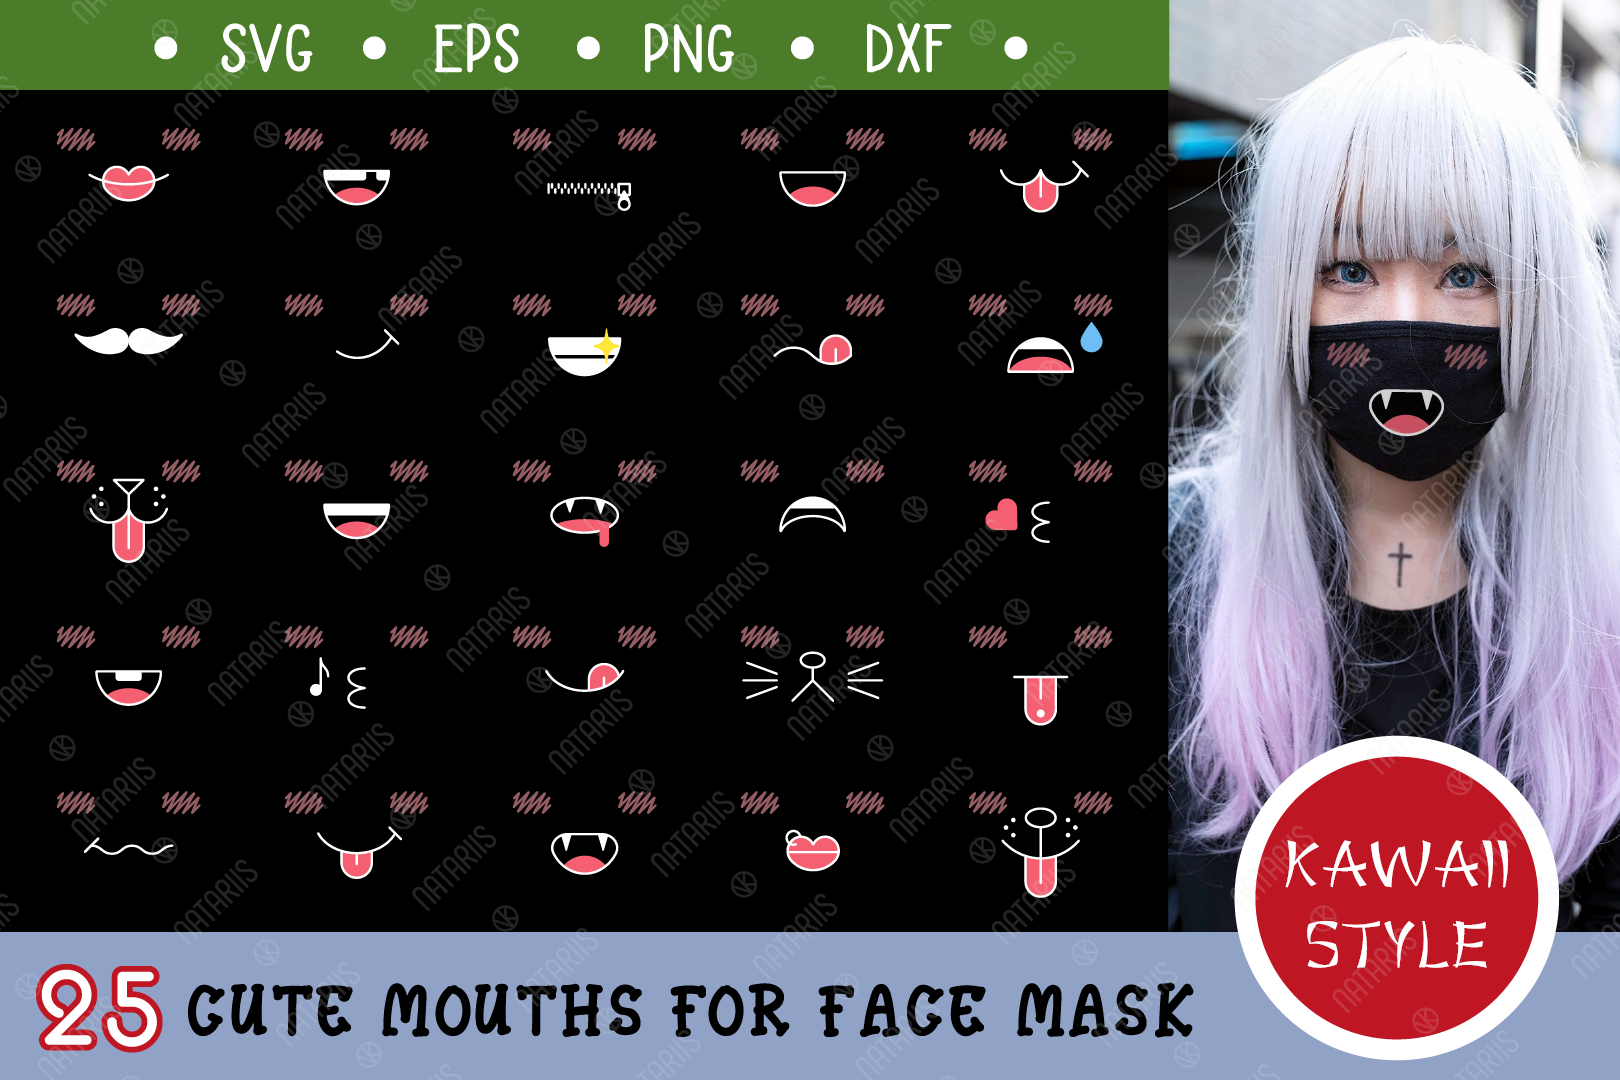 Civic mindre Modsige 25 Cute mouths for Black Medical Face Mask. SVG Kawaii Style. By Natariis  Studio | TheHungryJPEG